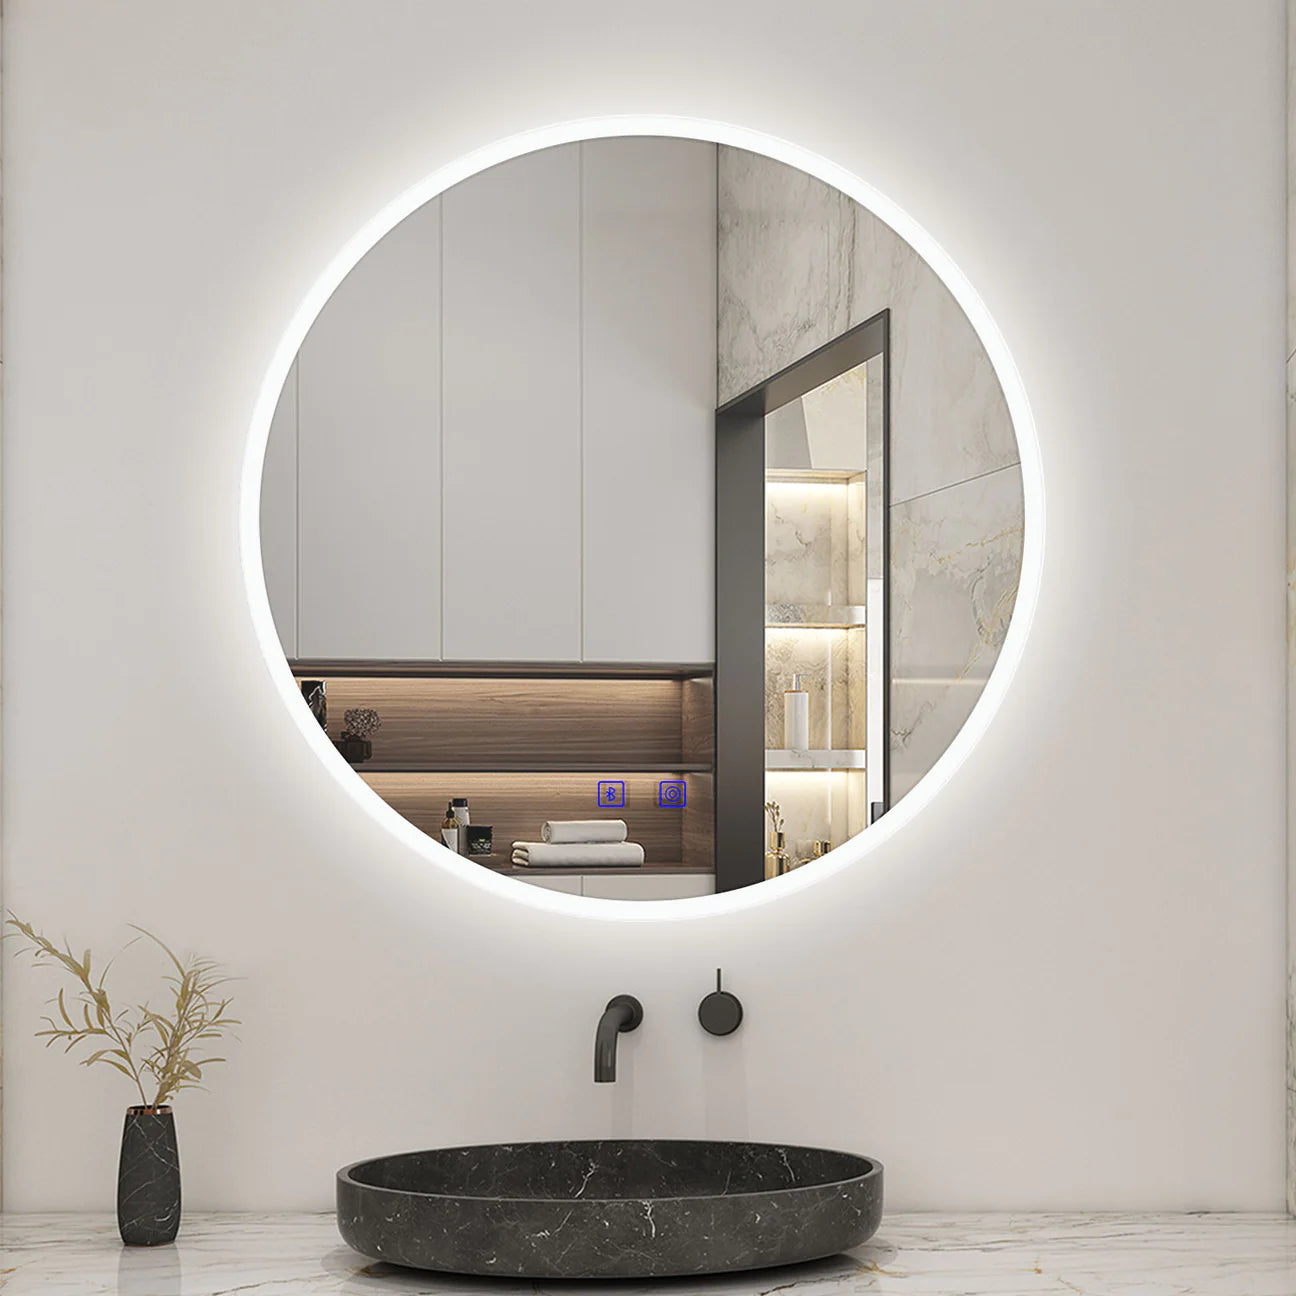 Round LED Bathroom Mirror with Demister Pad and Bluetooth|3 Colors|Dimming Function|IP44